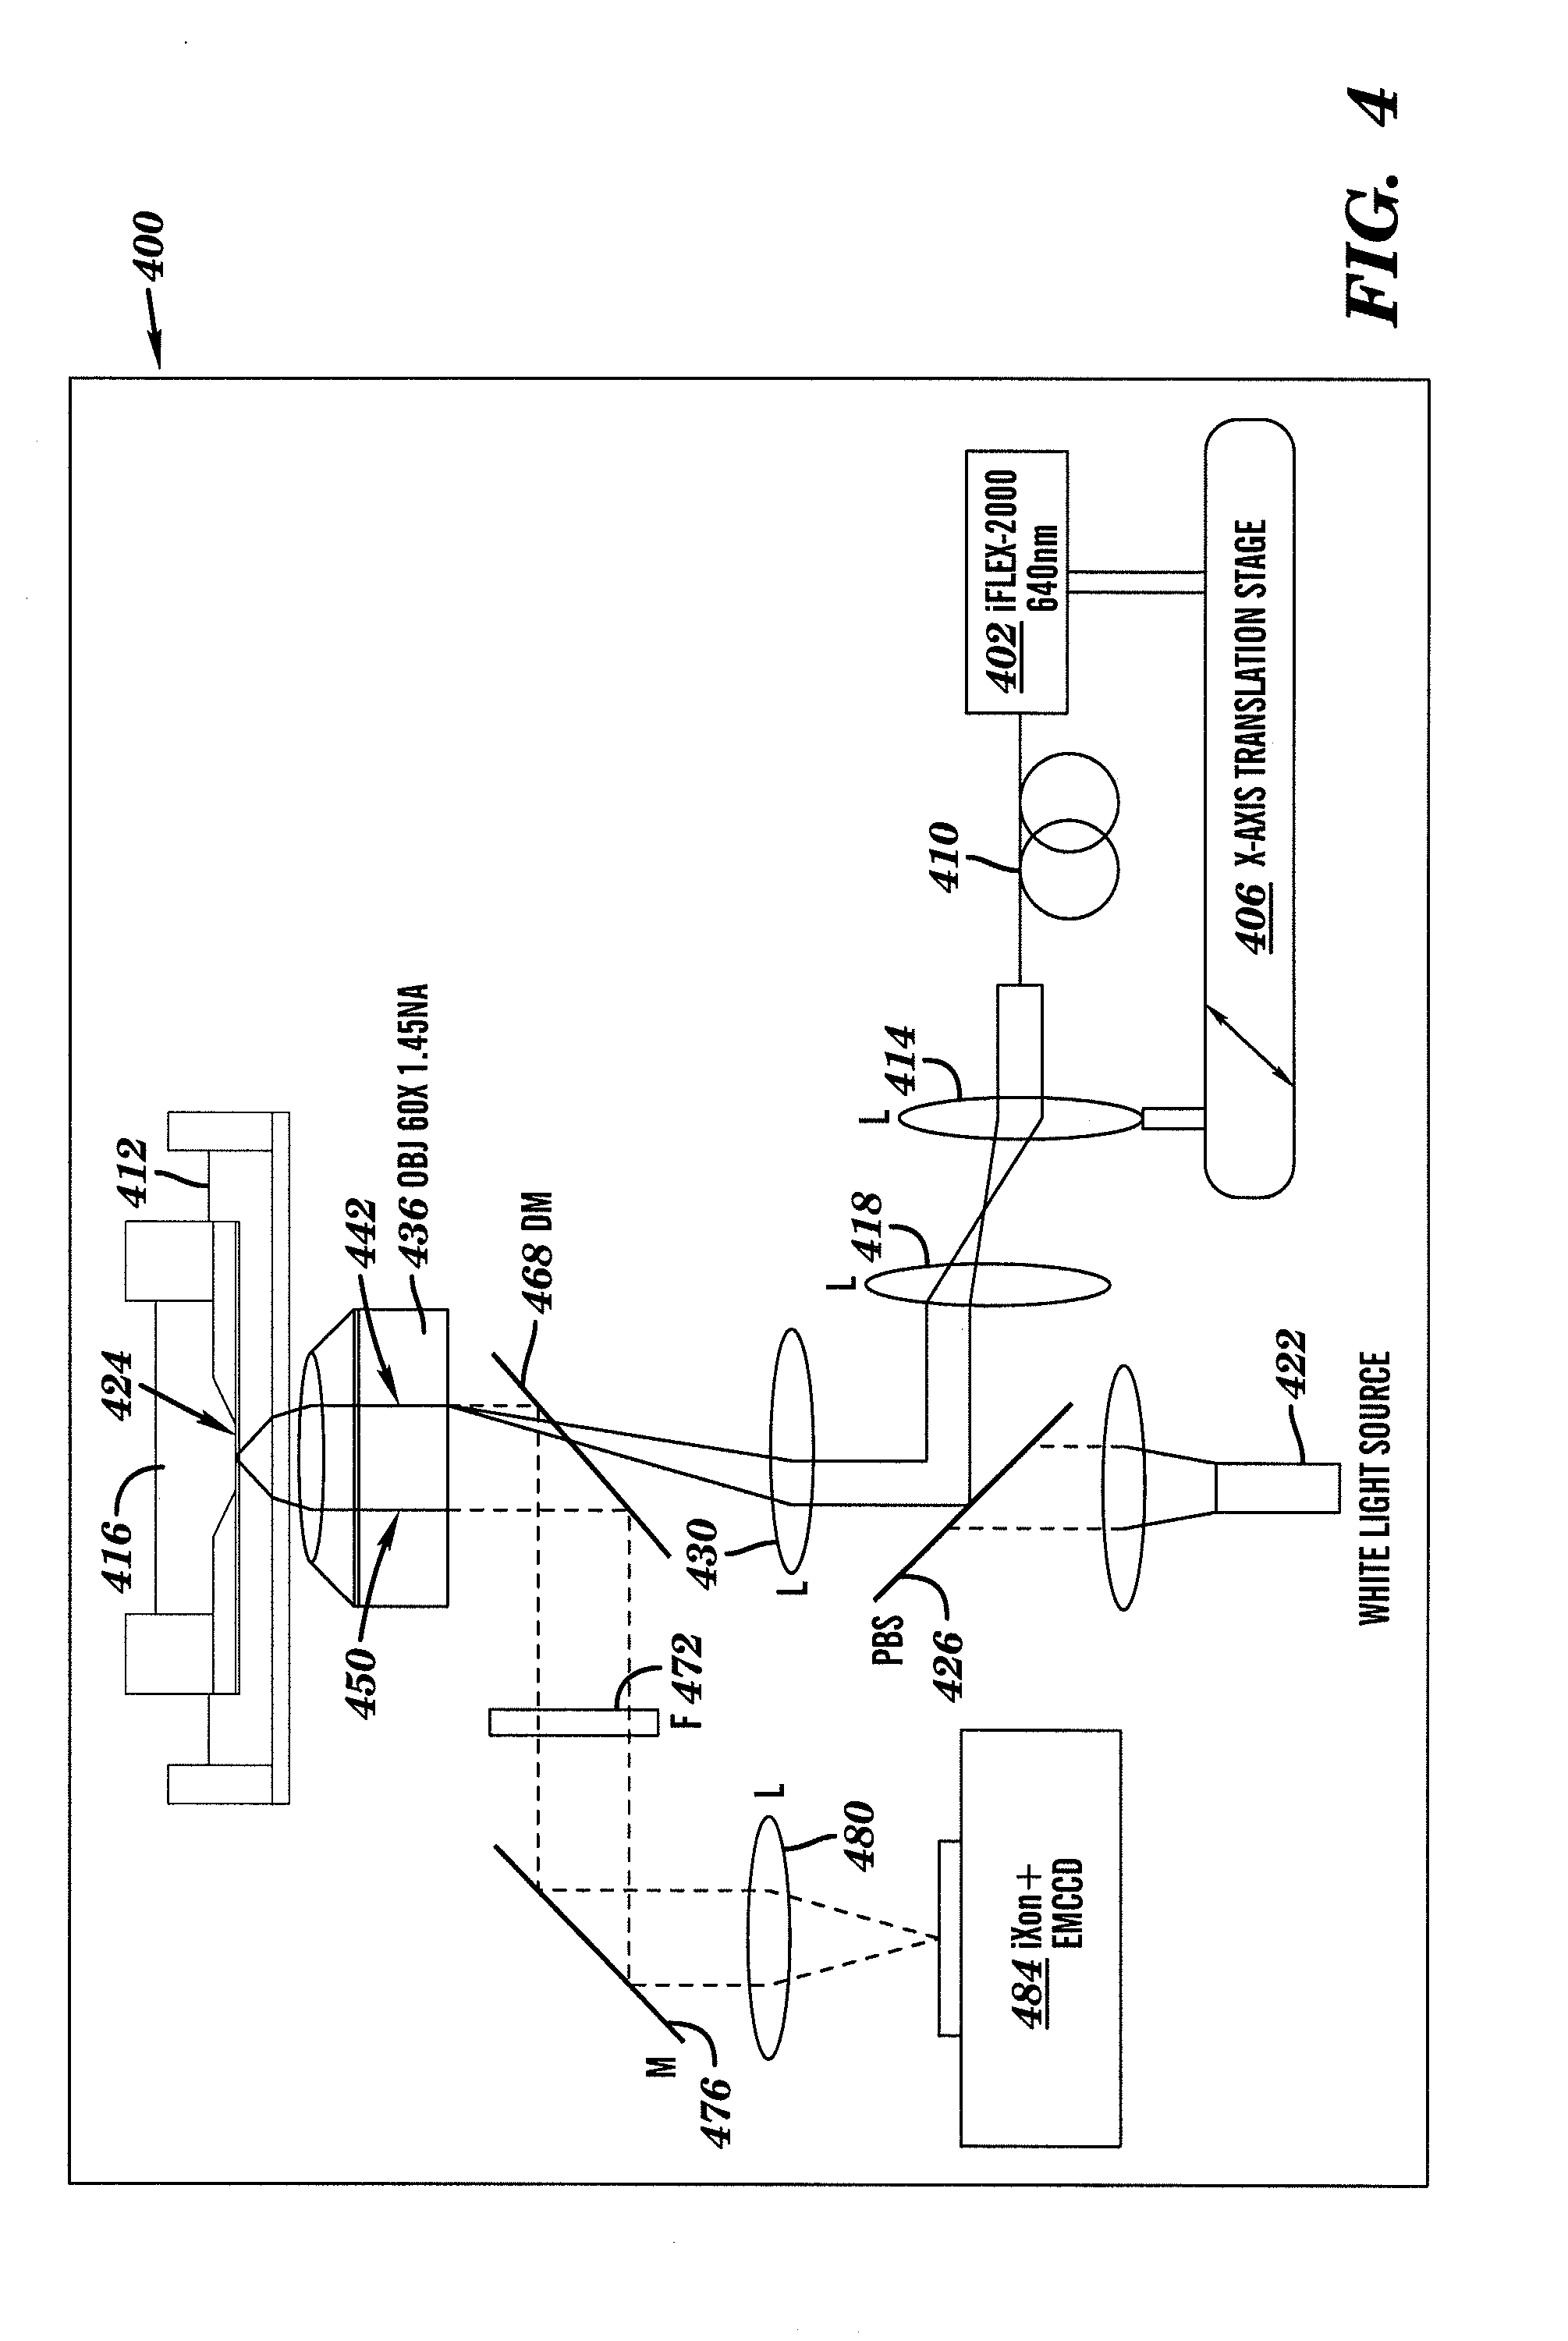 Method for imaging on thin solid-state interface between two fluids